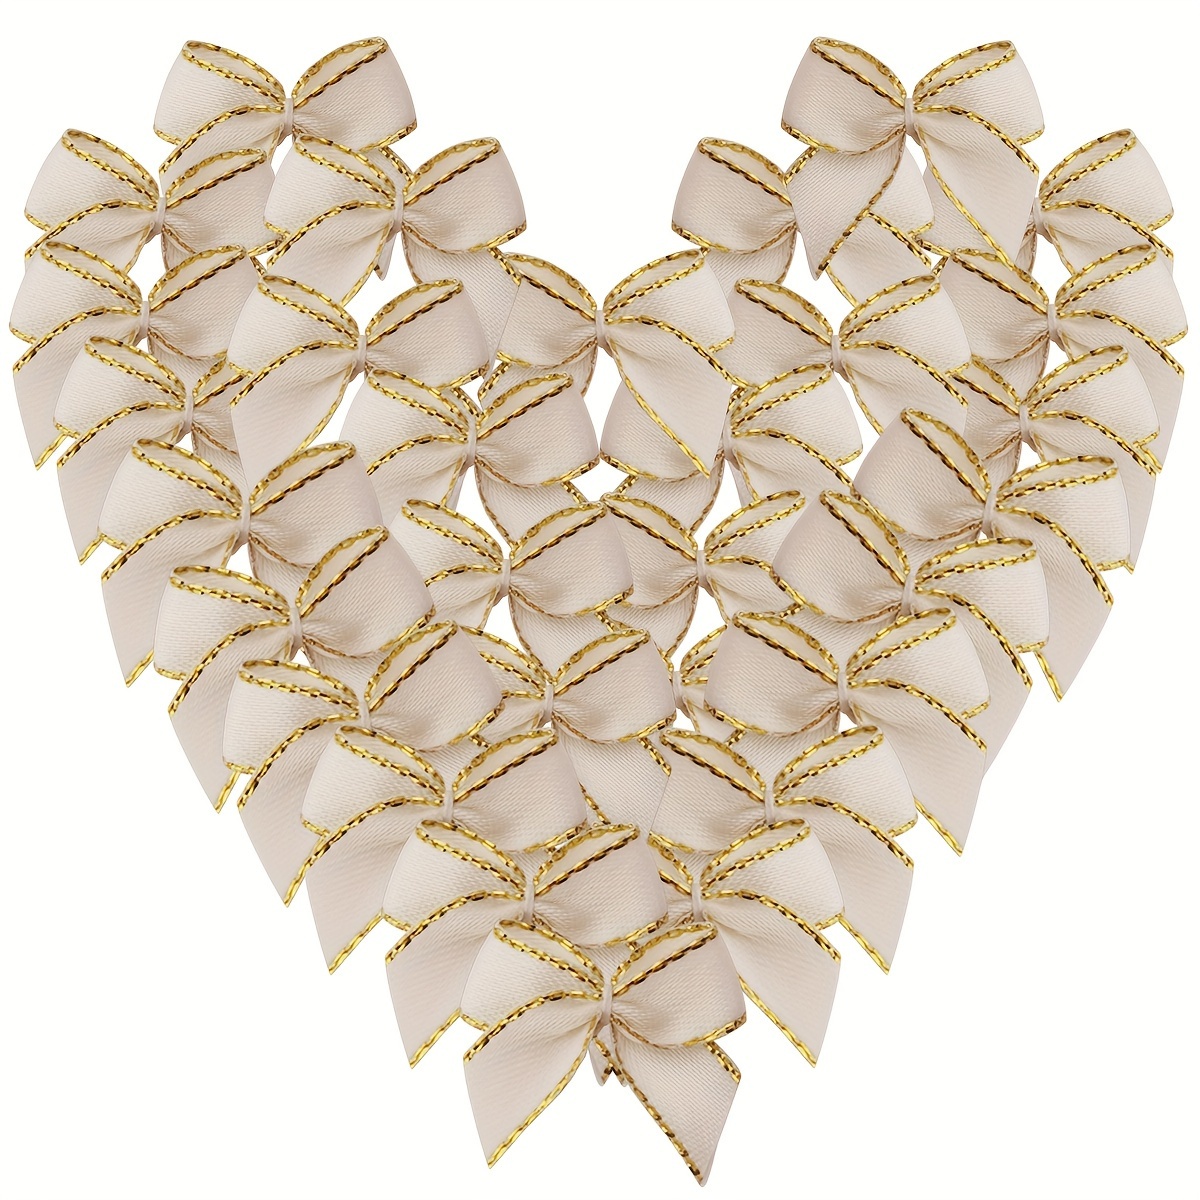 

50-piece Ivory Satin Mini Ribbon Bows With Gold Trim, 1.2" & 1.6" - Perfect For Crafts, Gift Wrapping, Sewing, Mother's Day & Christmas Decorations